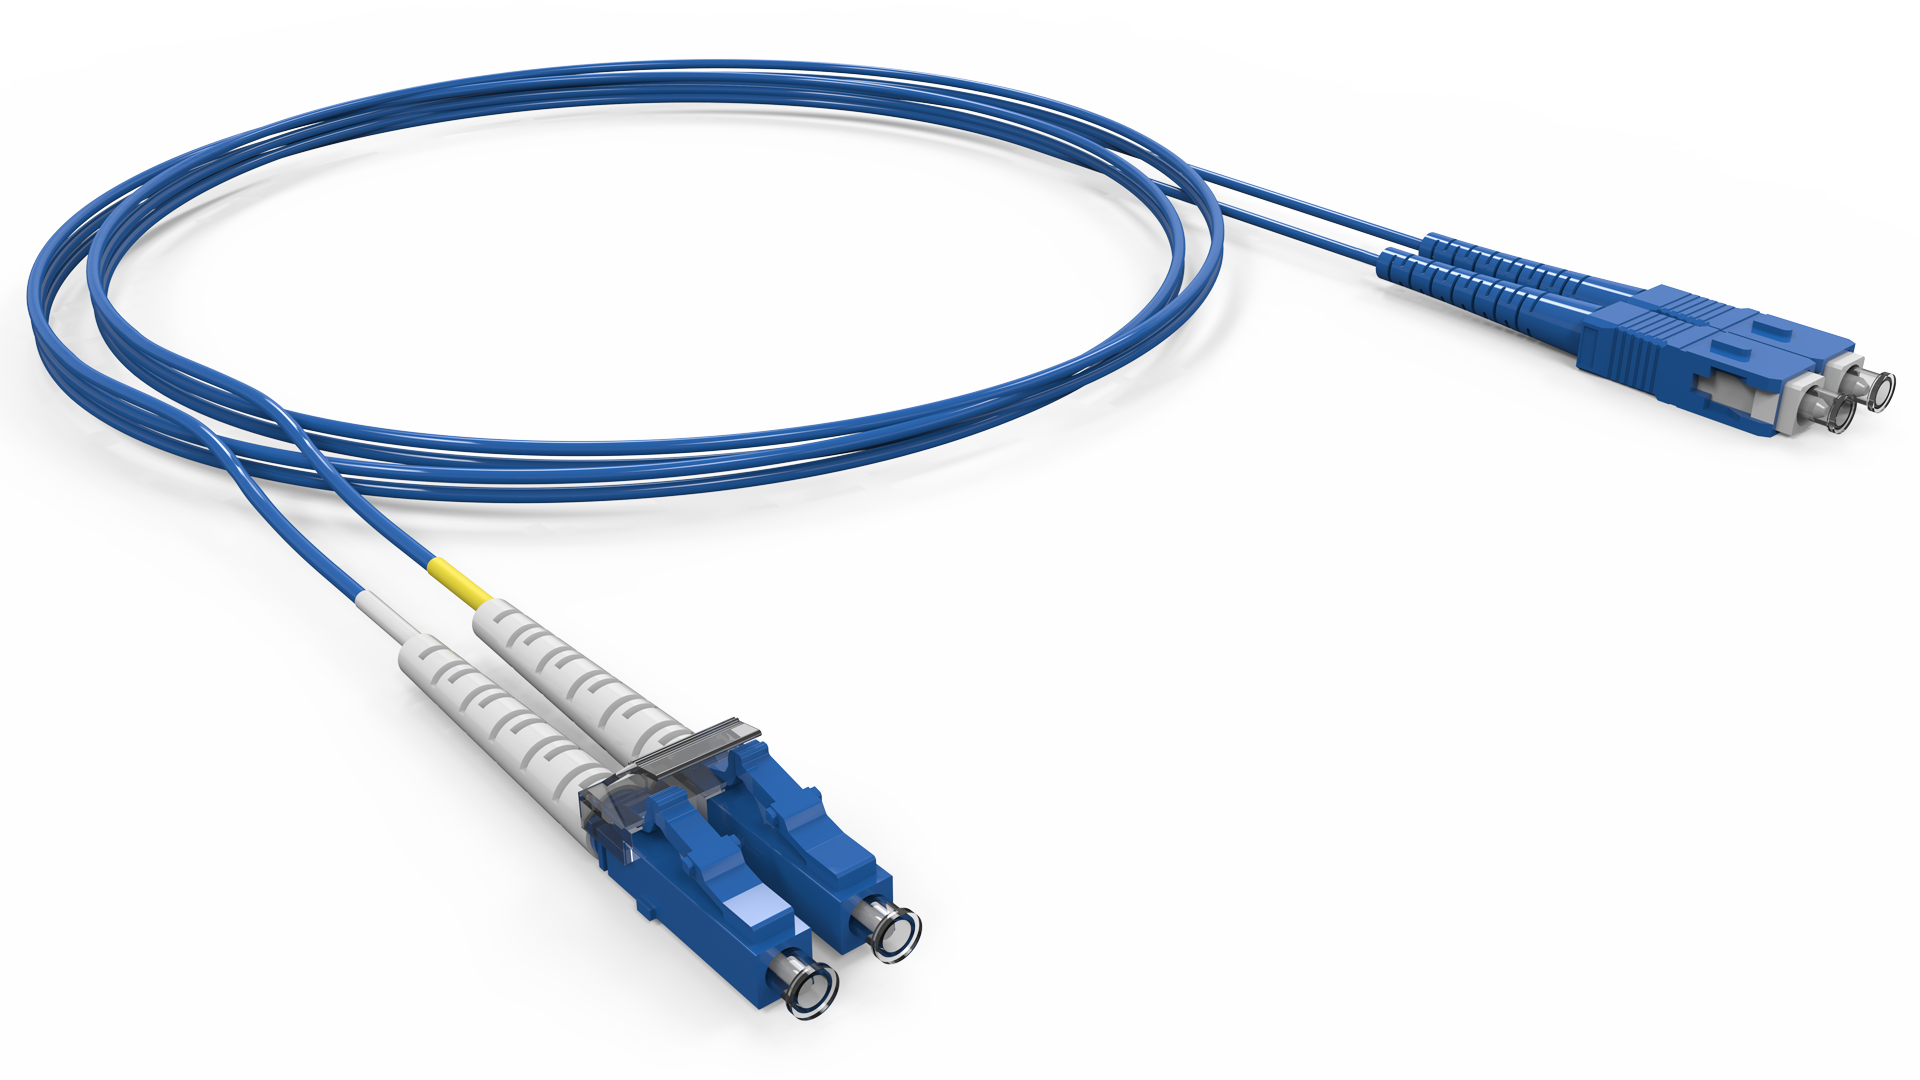 File:Connectique fibre optique SC!APC (Switching Connector ! Angled  Physical Contact).jpg - Wikimedia Commons